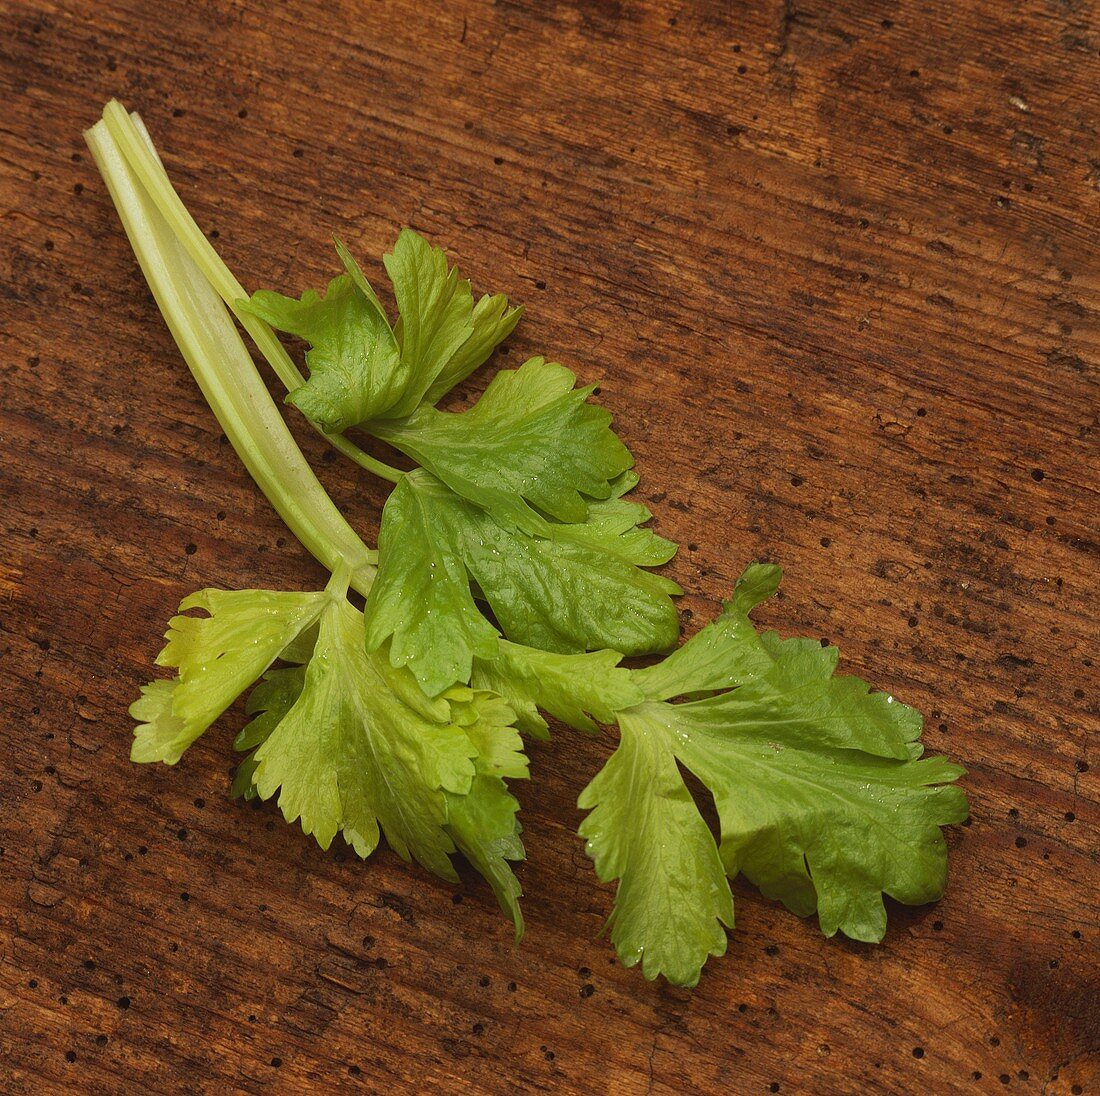 Celery leaf with drops of water on wooden background